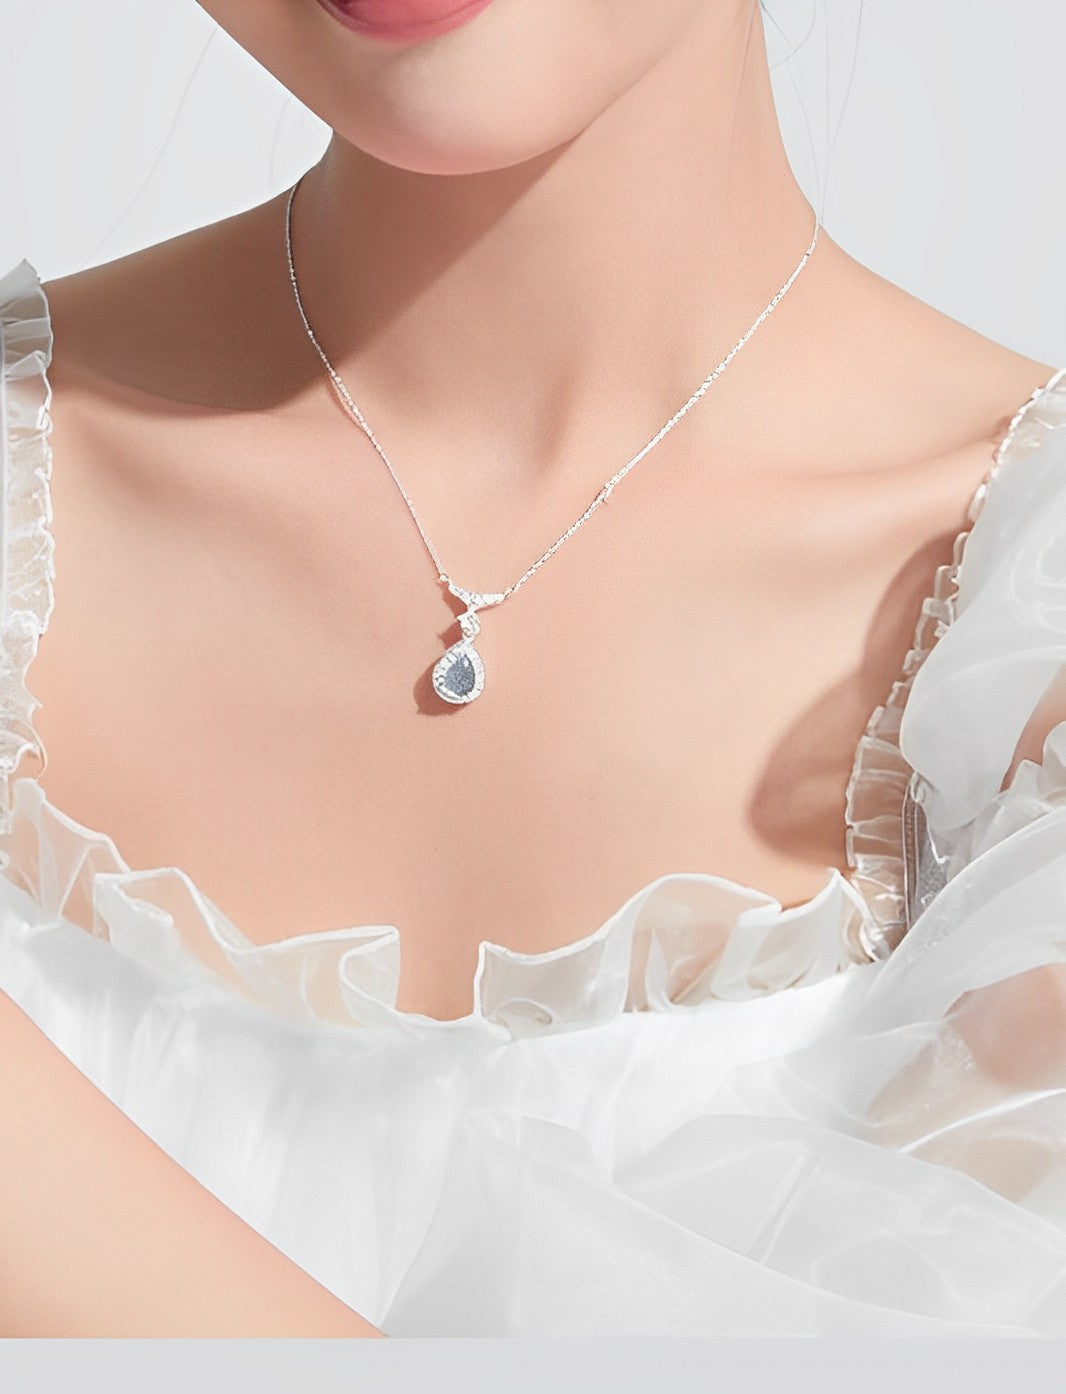 Water Droplets Necklace ネックレス　銀色　シルバー　古着